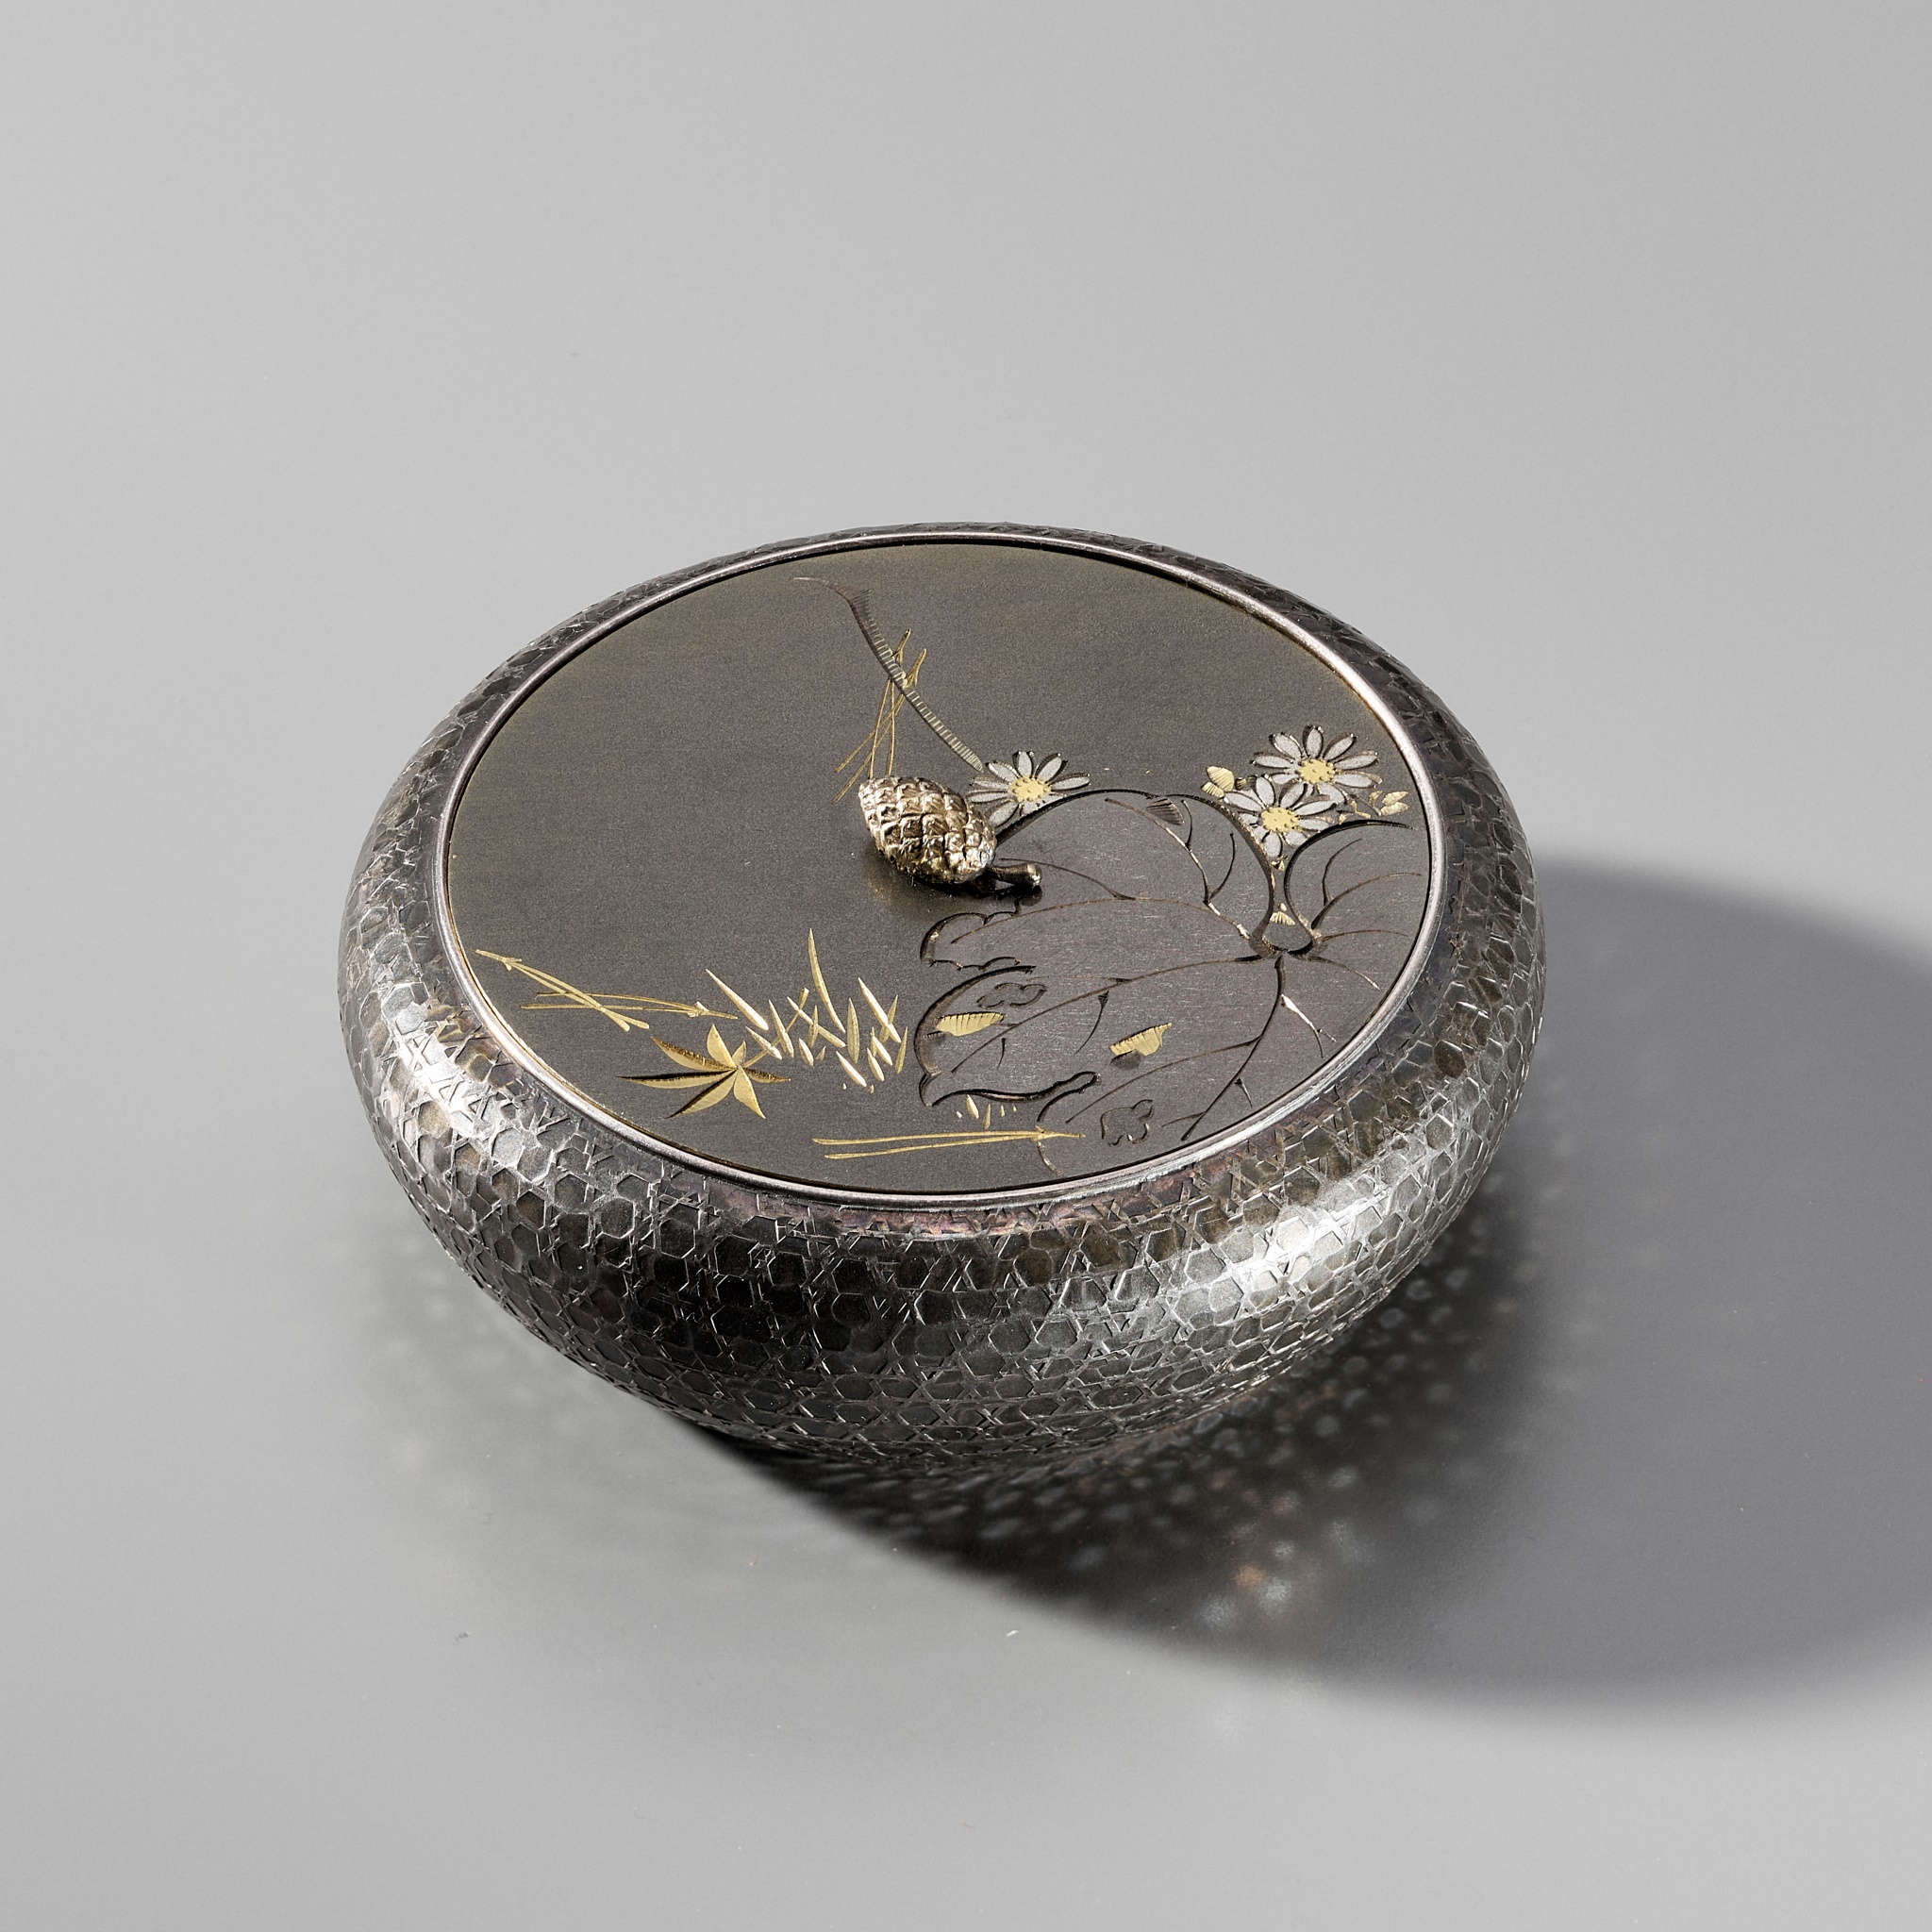 Lot 136 - HATTORI: A RARE SILVER AND MIXED METAL KOGO